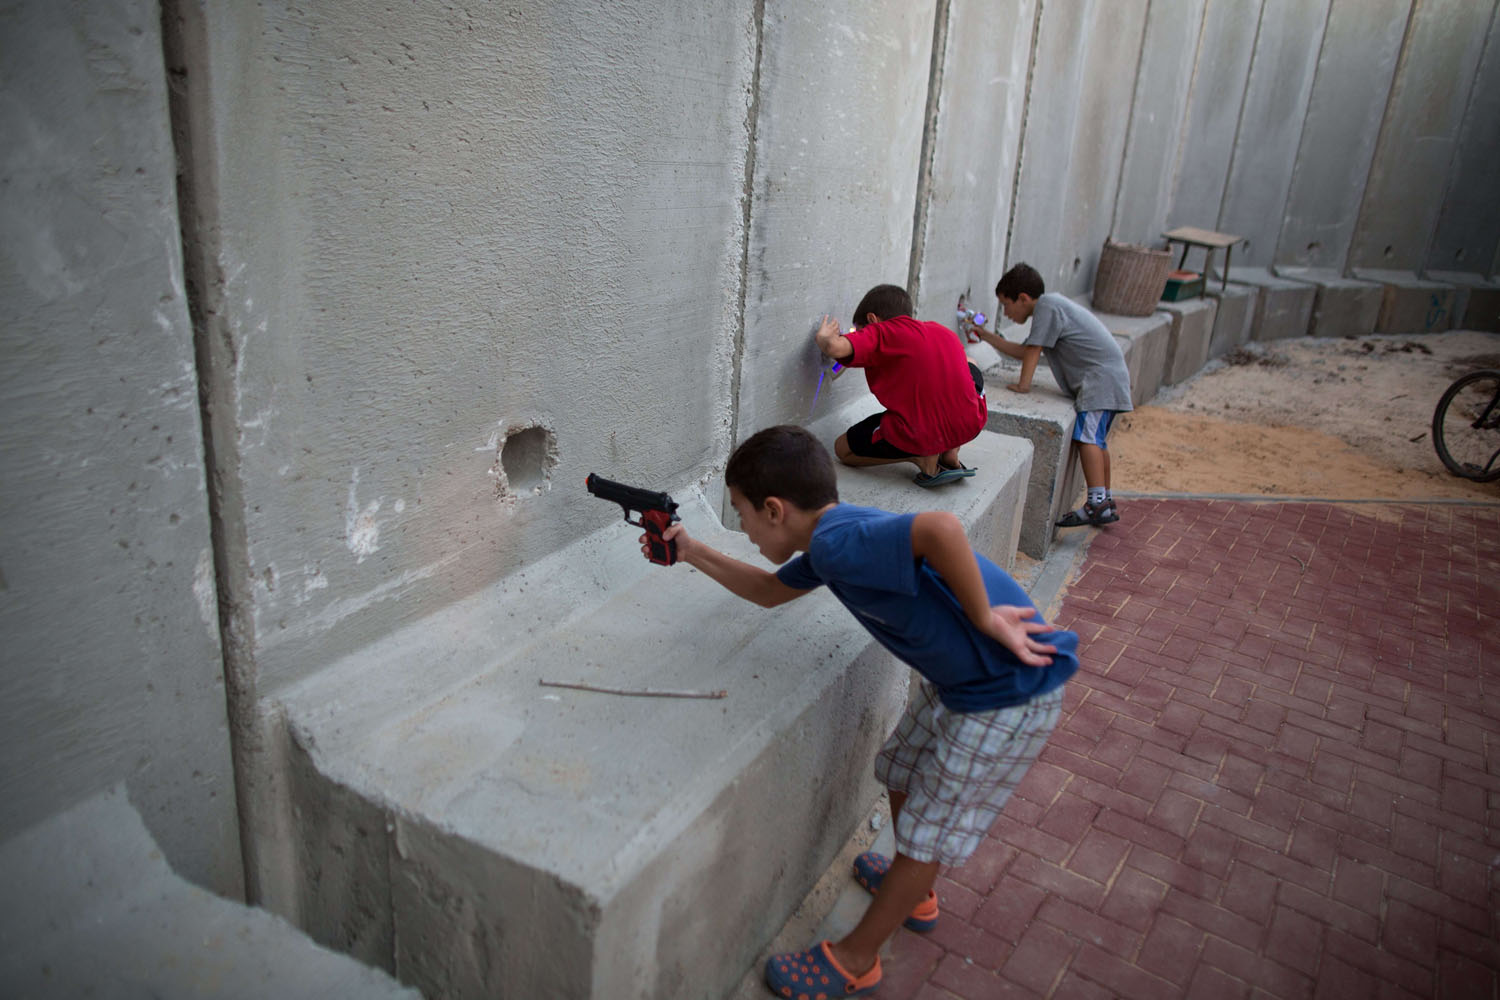 Sept. 9, 2014. Israeli children hold toy guns as they pretend to play war games next to newly built protection cement walls around a kindergarten in the center of Kibbutz Nahal Oz located near the border with Gaza Strip. Since the ceasefire between Israel and Hamas following fifty days of fight most of Israeli residents leaving near the Gaza Border hace returned to their homes with high army alert and new measures to protect them.